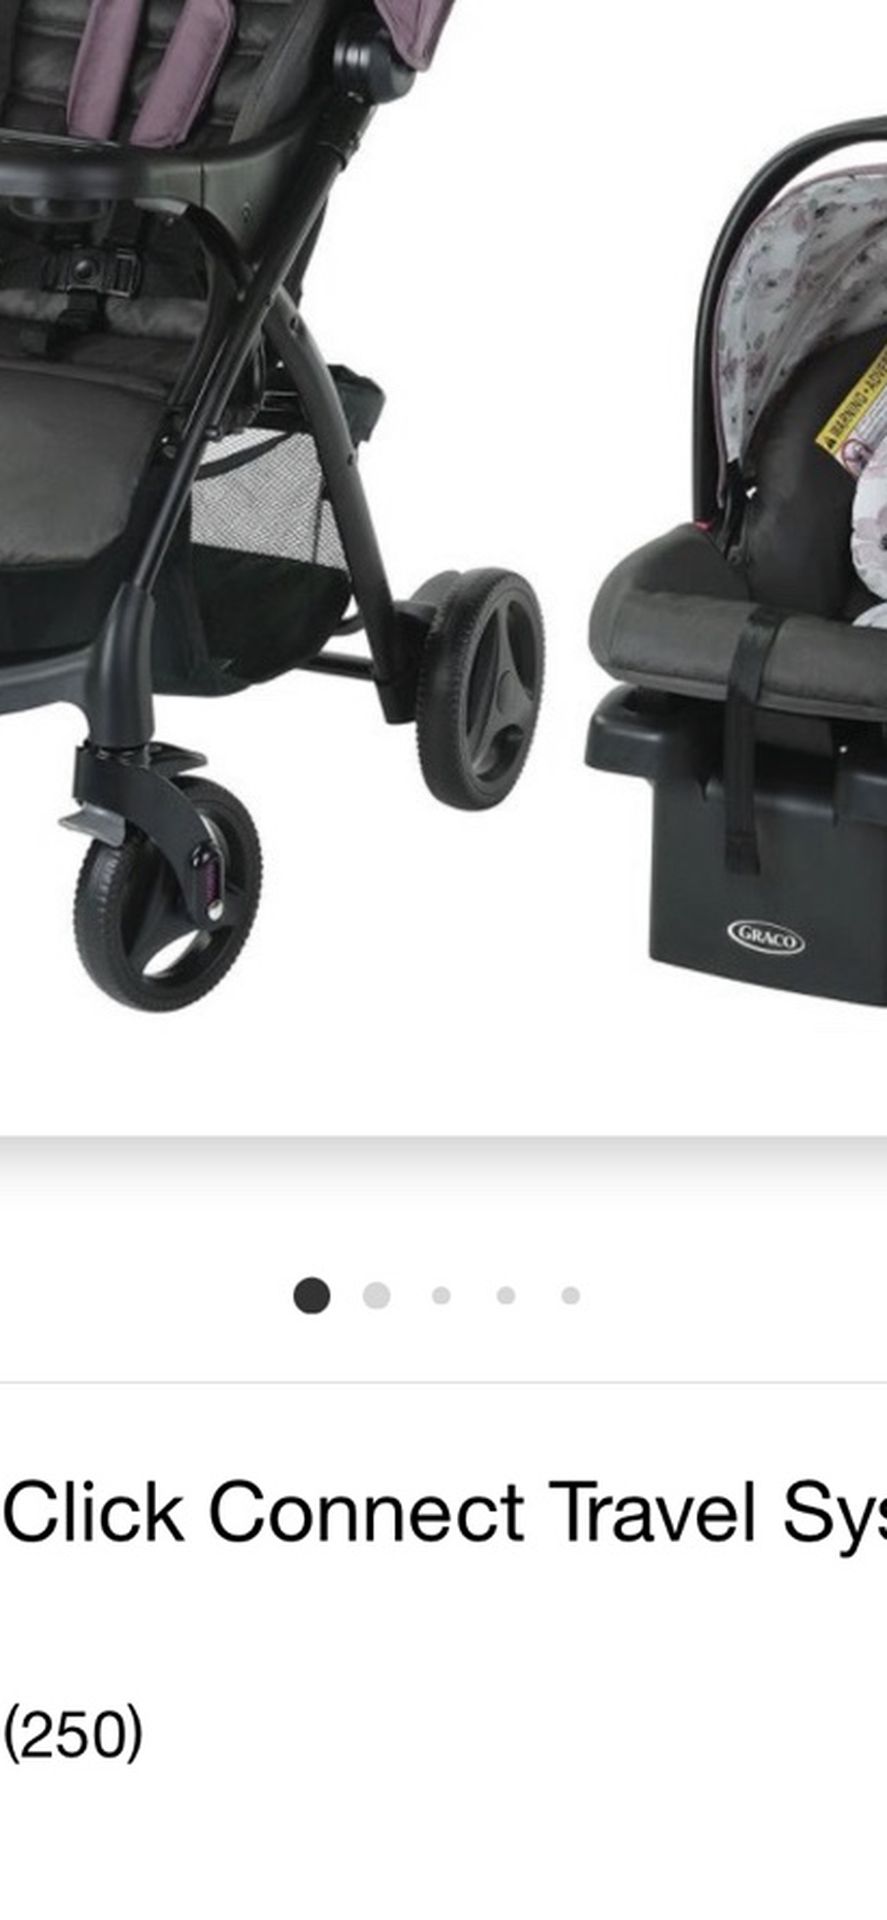 Infant carseat and stroller